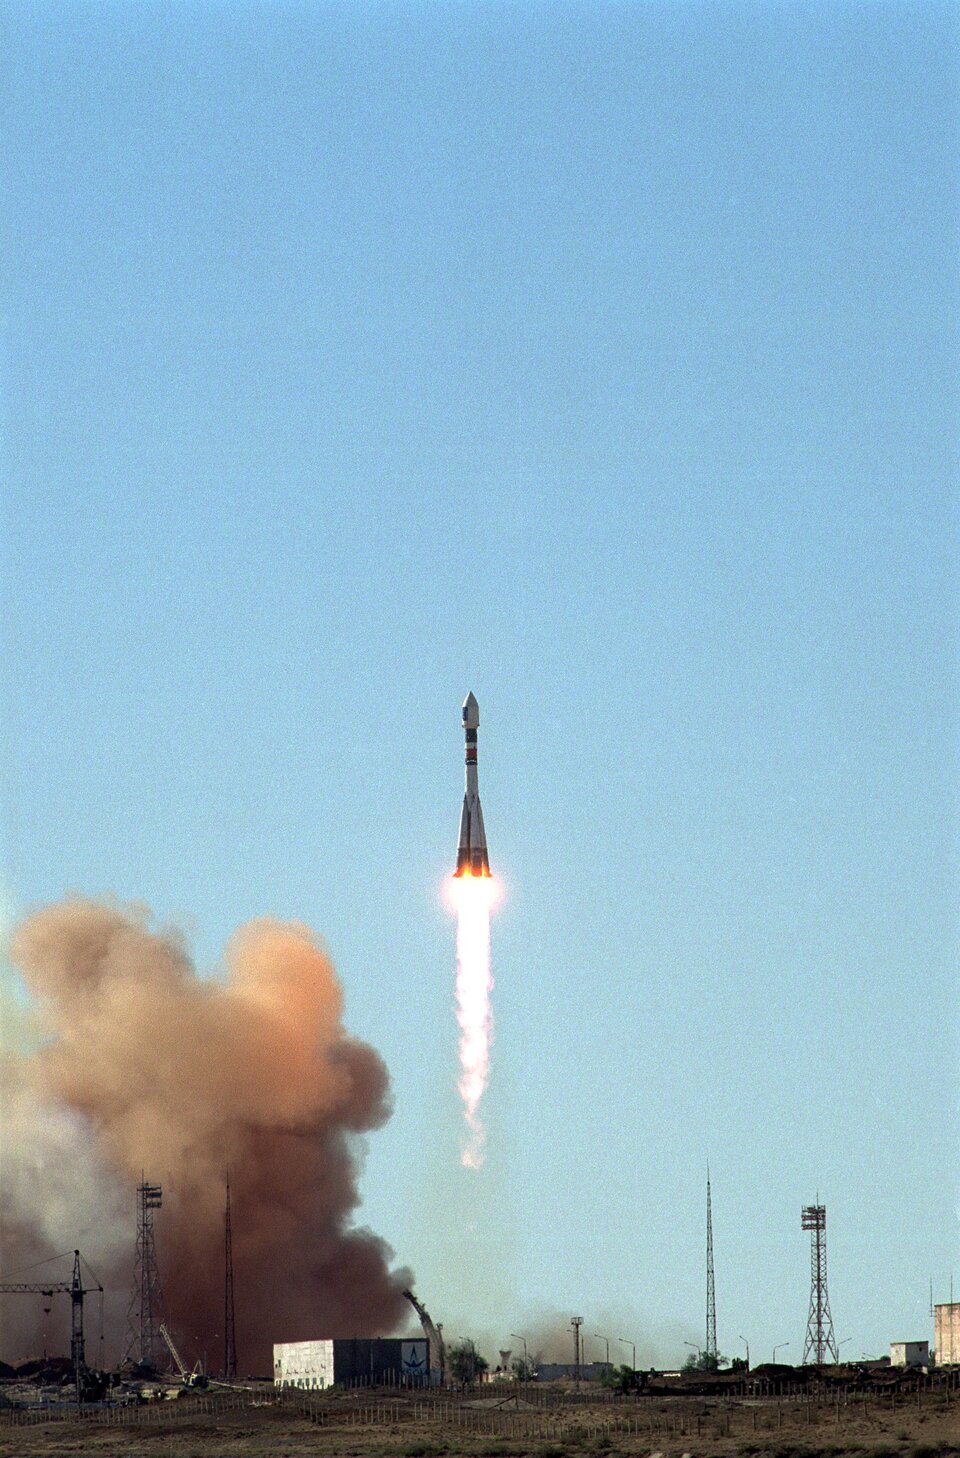 Cooperation with ESA - Cluster satellites were launched from Baikonur in 2000